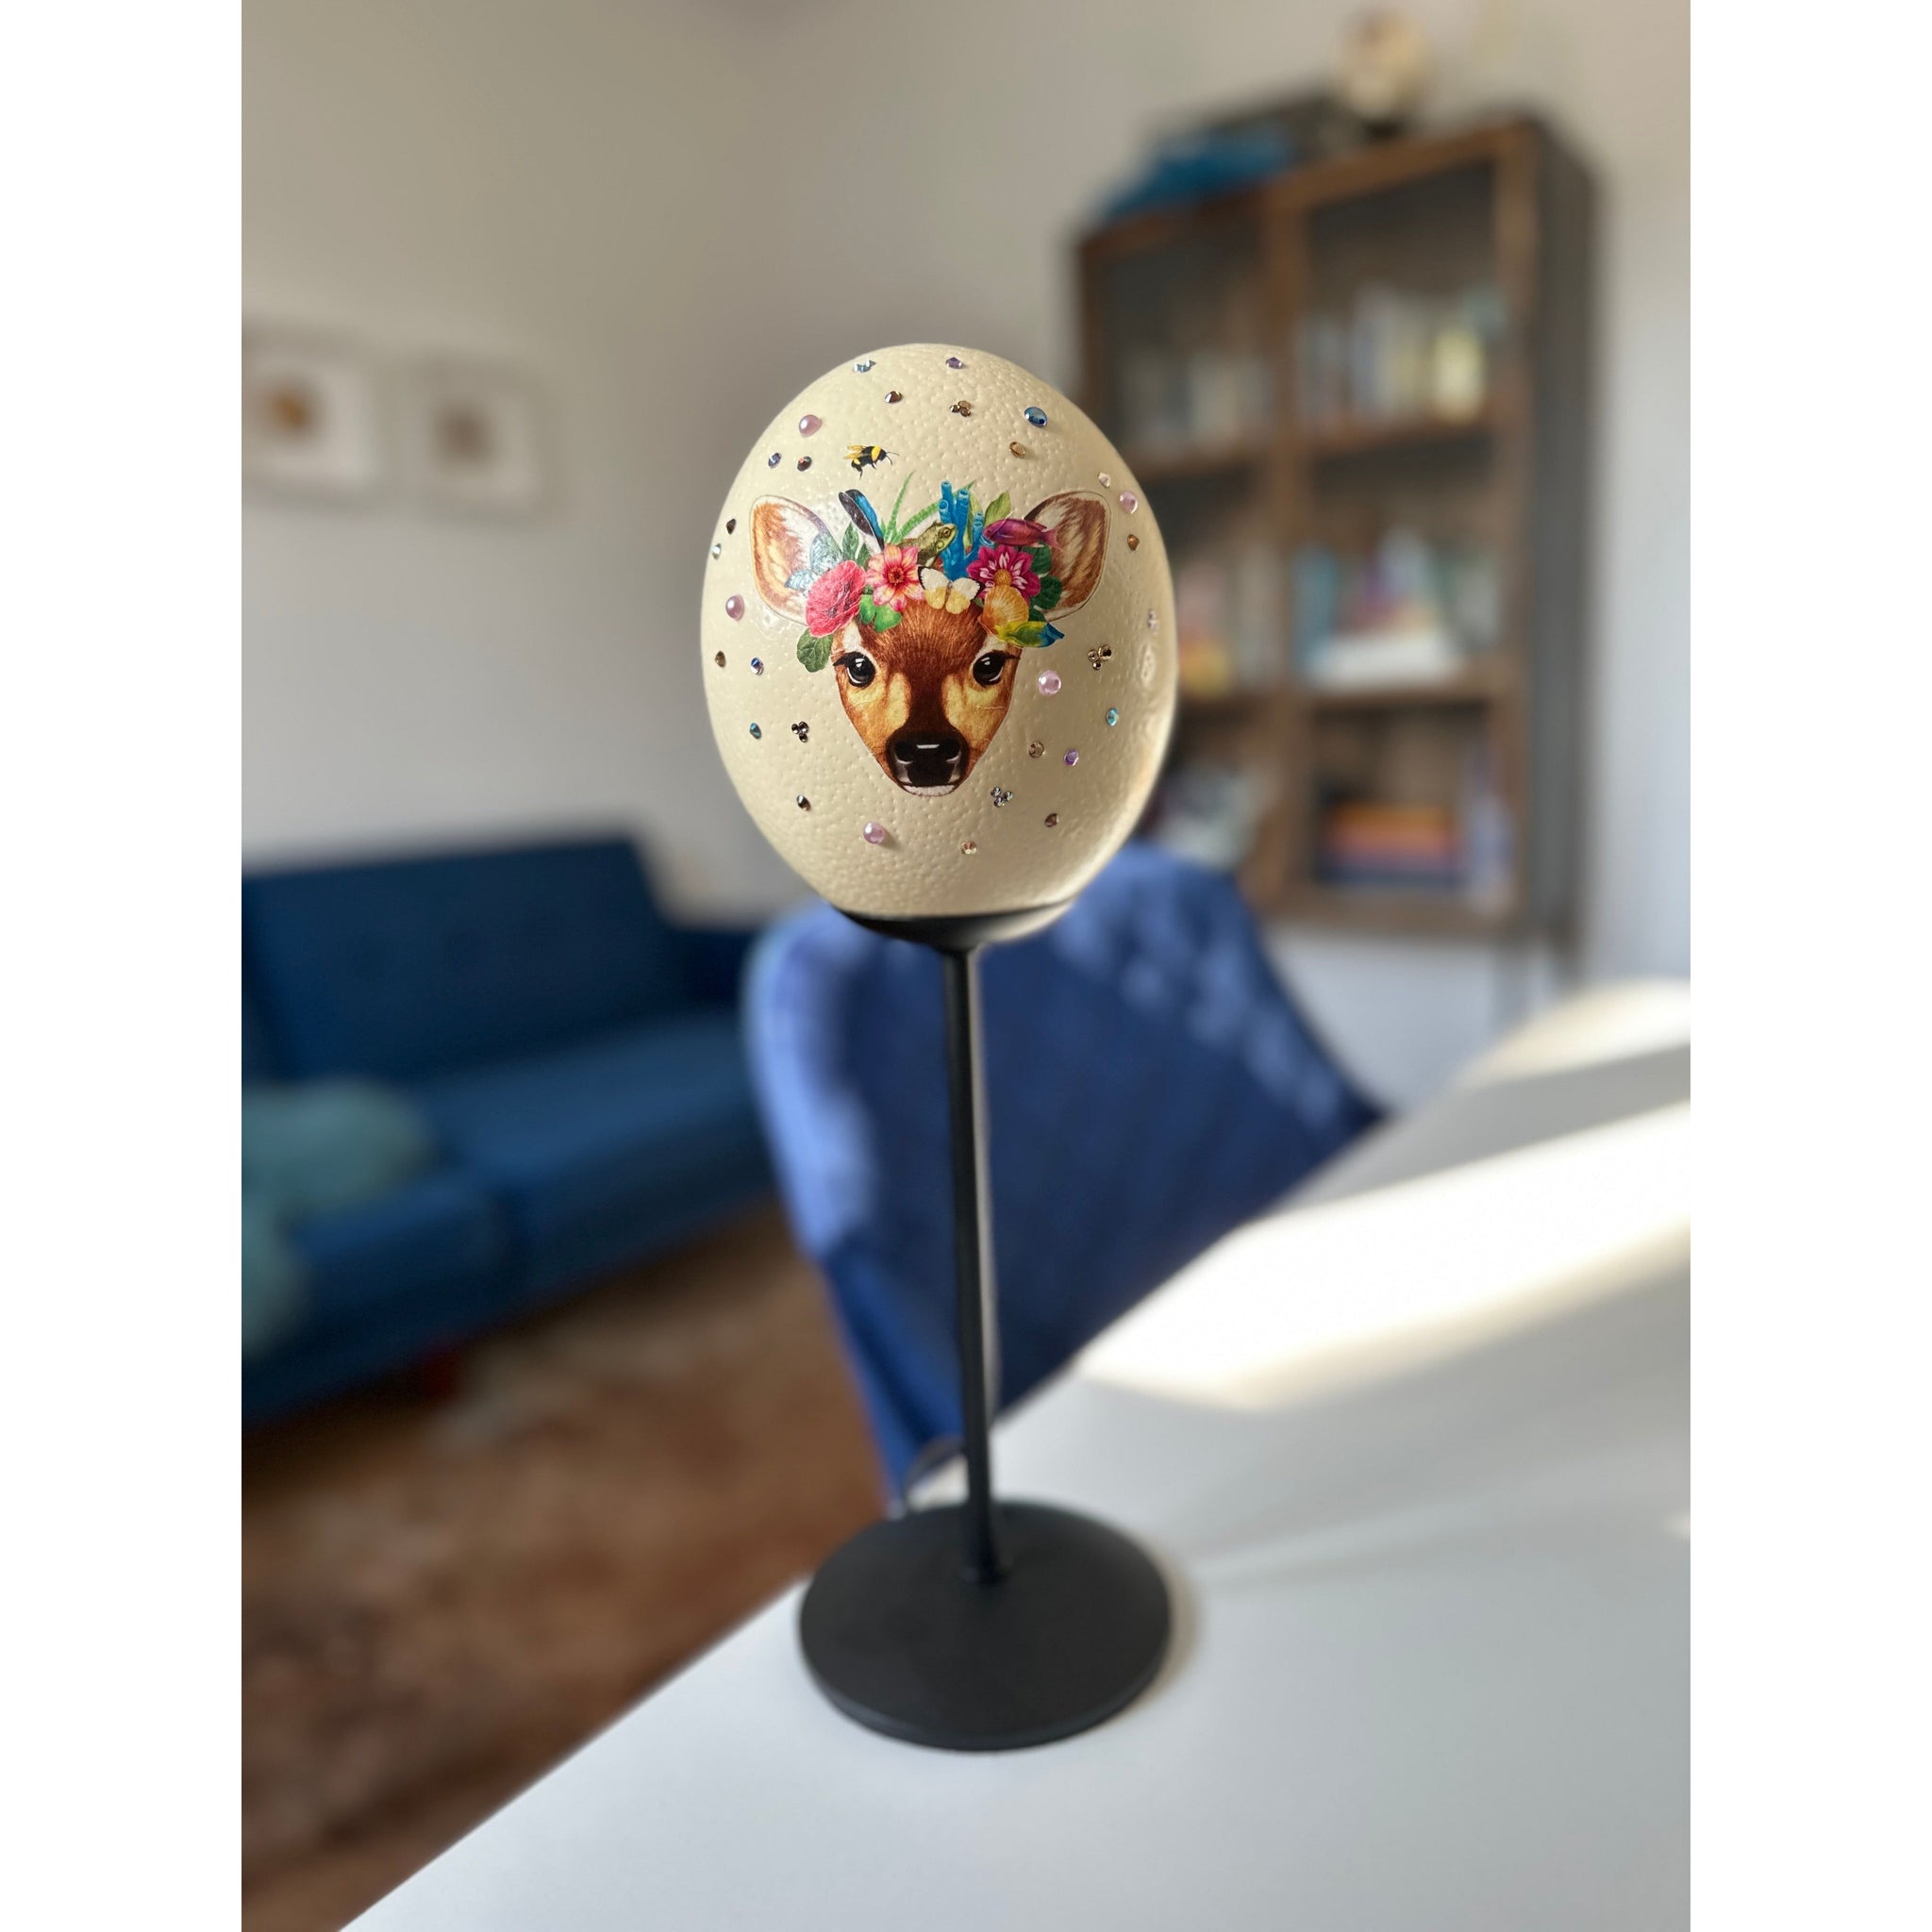 "Deer" table lamp, artfully decorated with a real ostrich egg